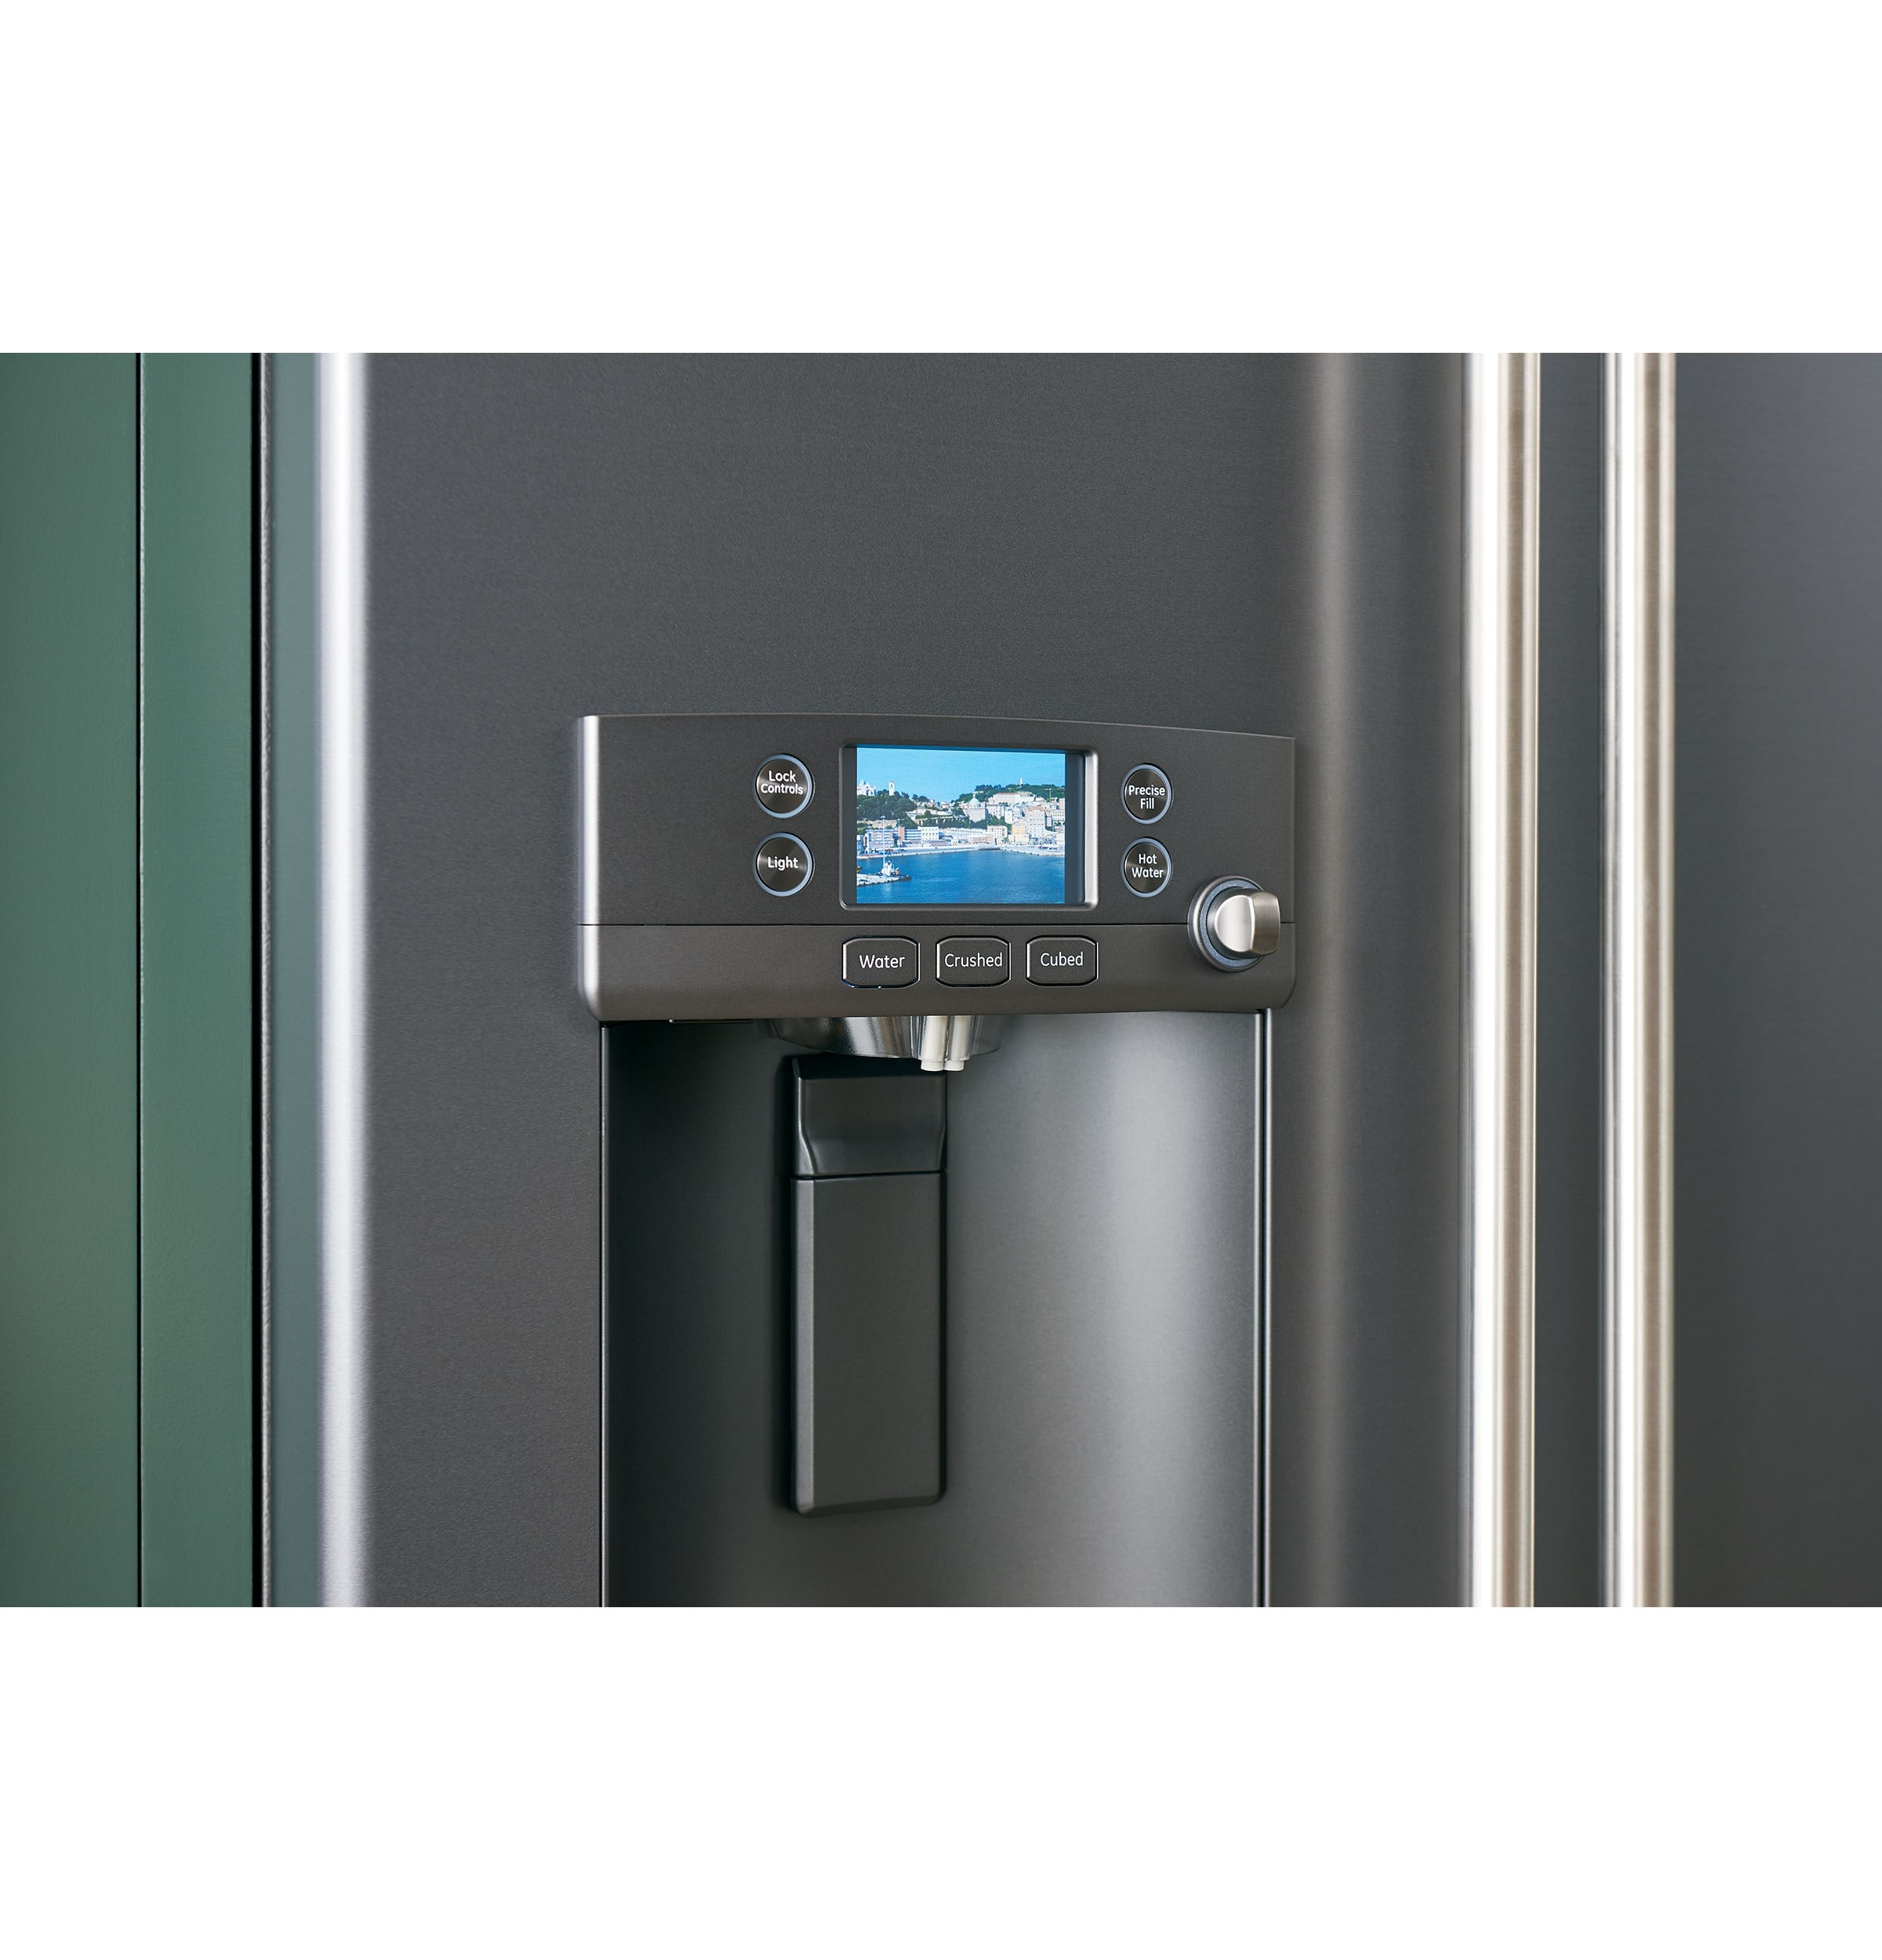 GE Refrigerator with Hot Water Dispenser